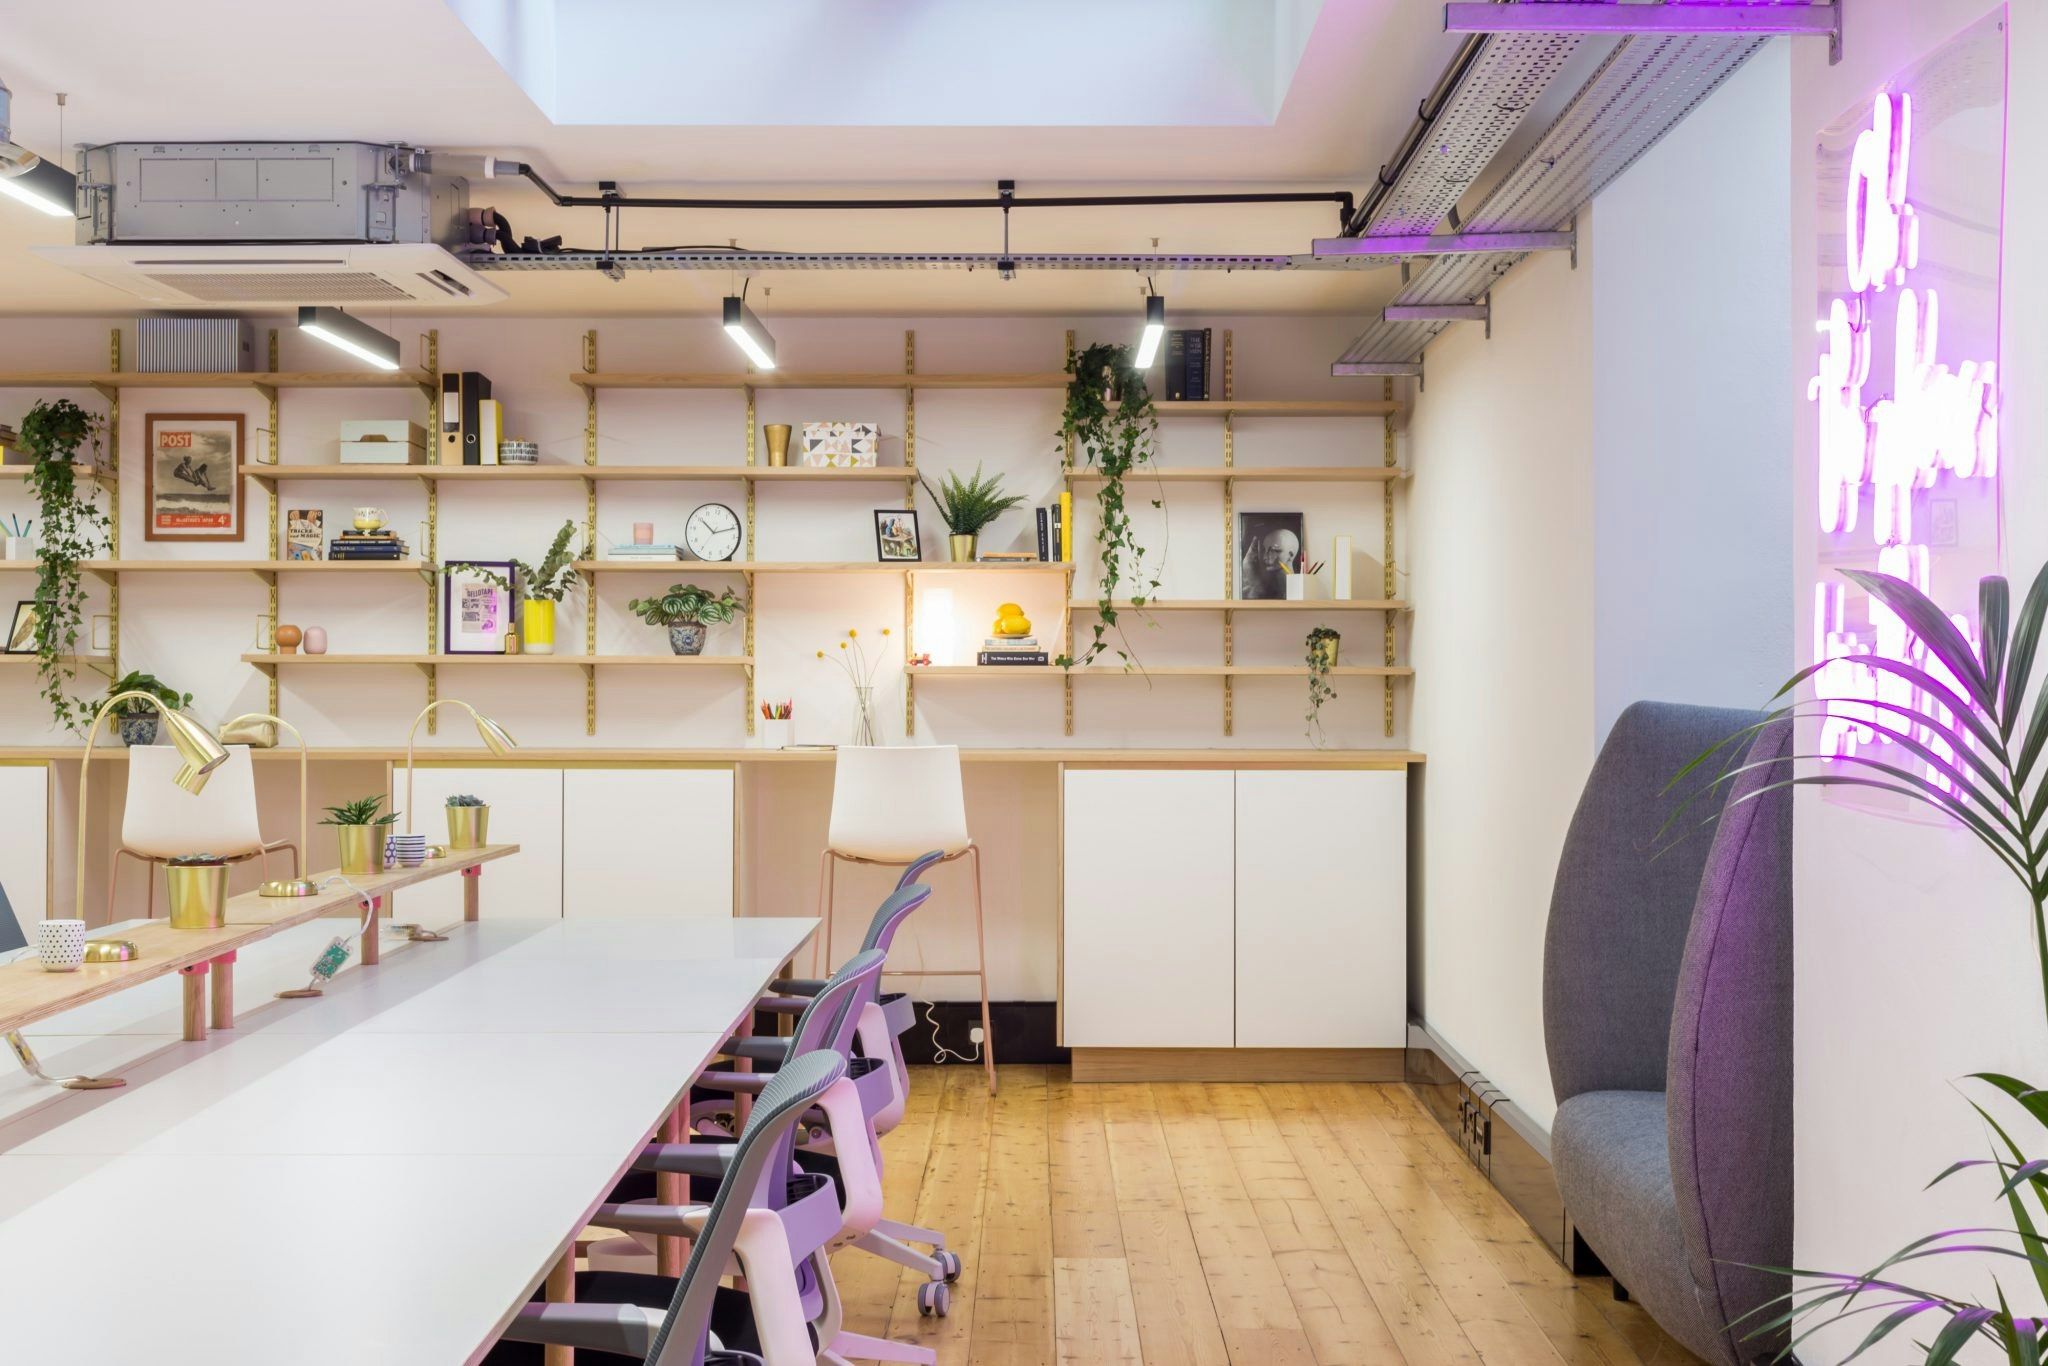 The Cuckooz Nest coworking space in London has childcare.